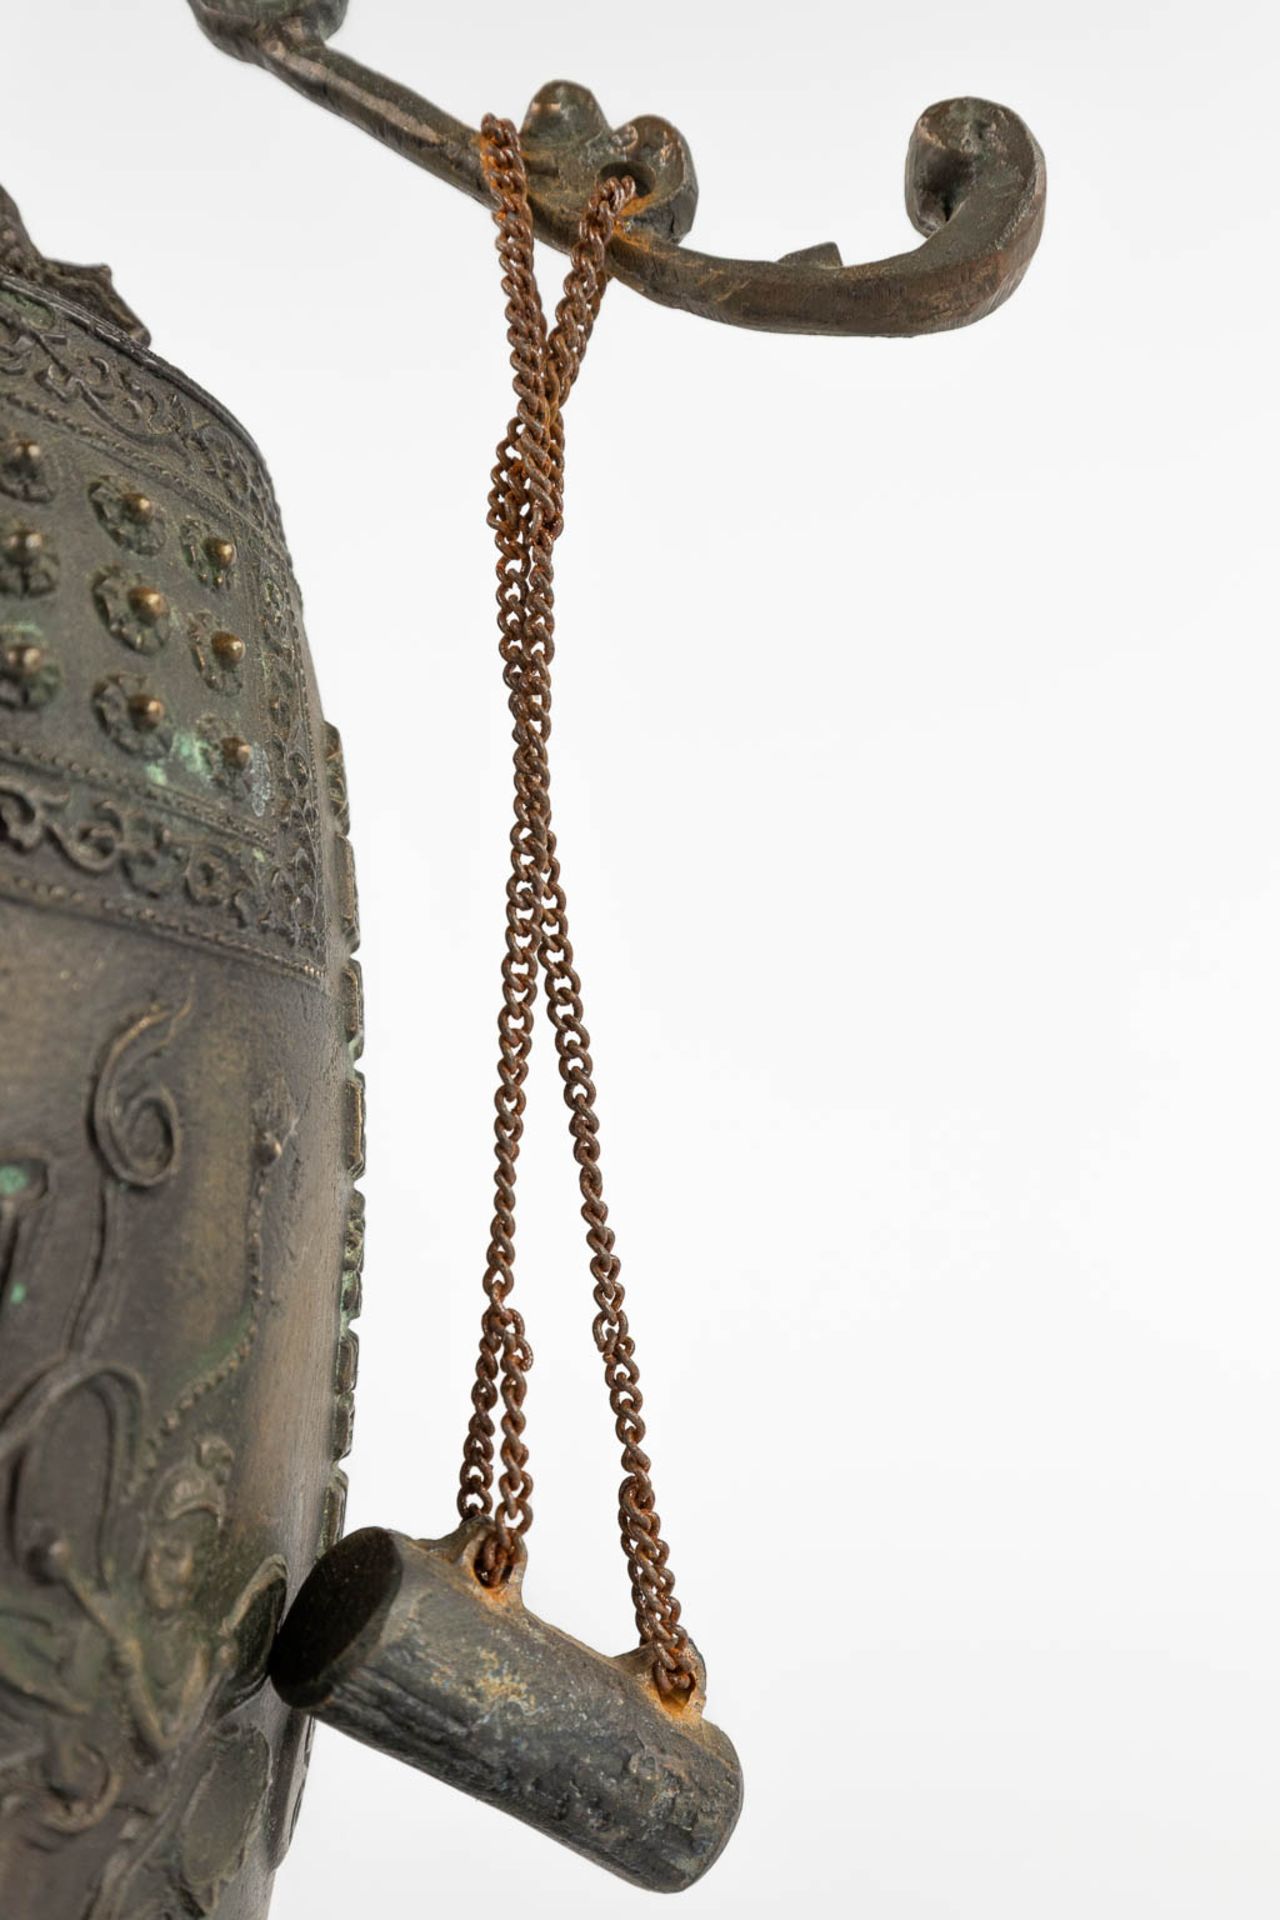 3 bells and a gong, Oriental. 19th/20th C. (L:13 x W:47 x H:55 cm) - Image 11 of 28